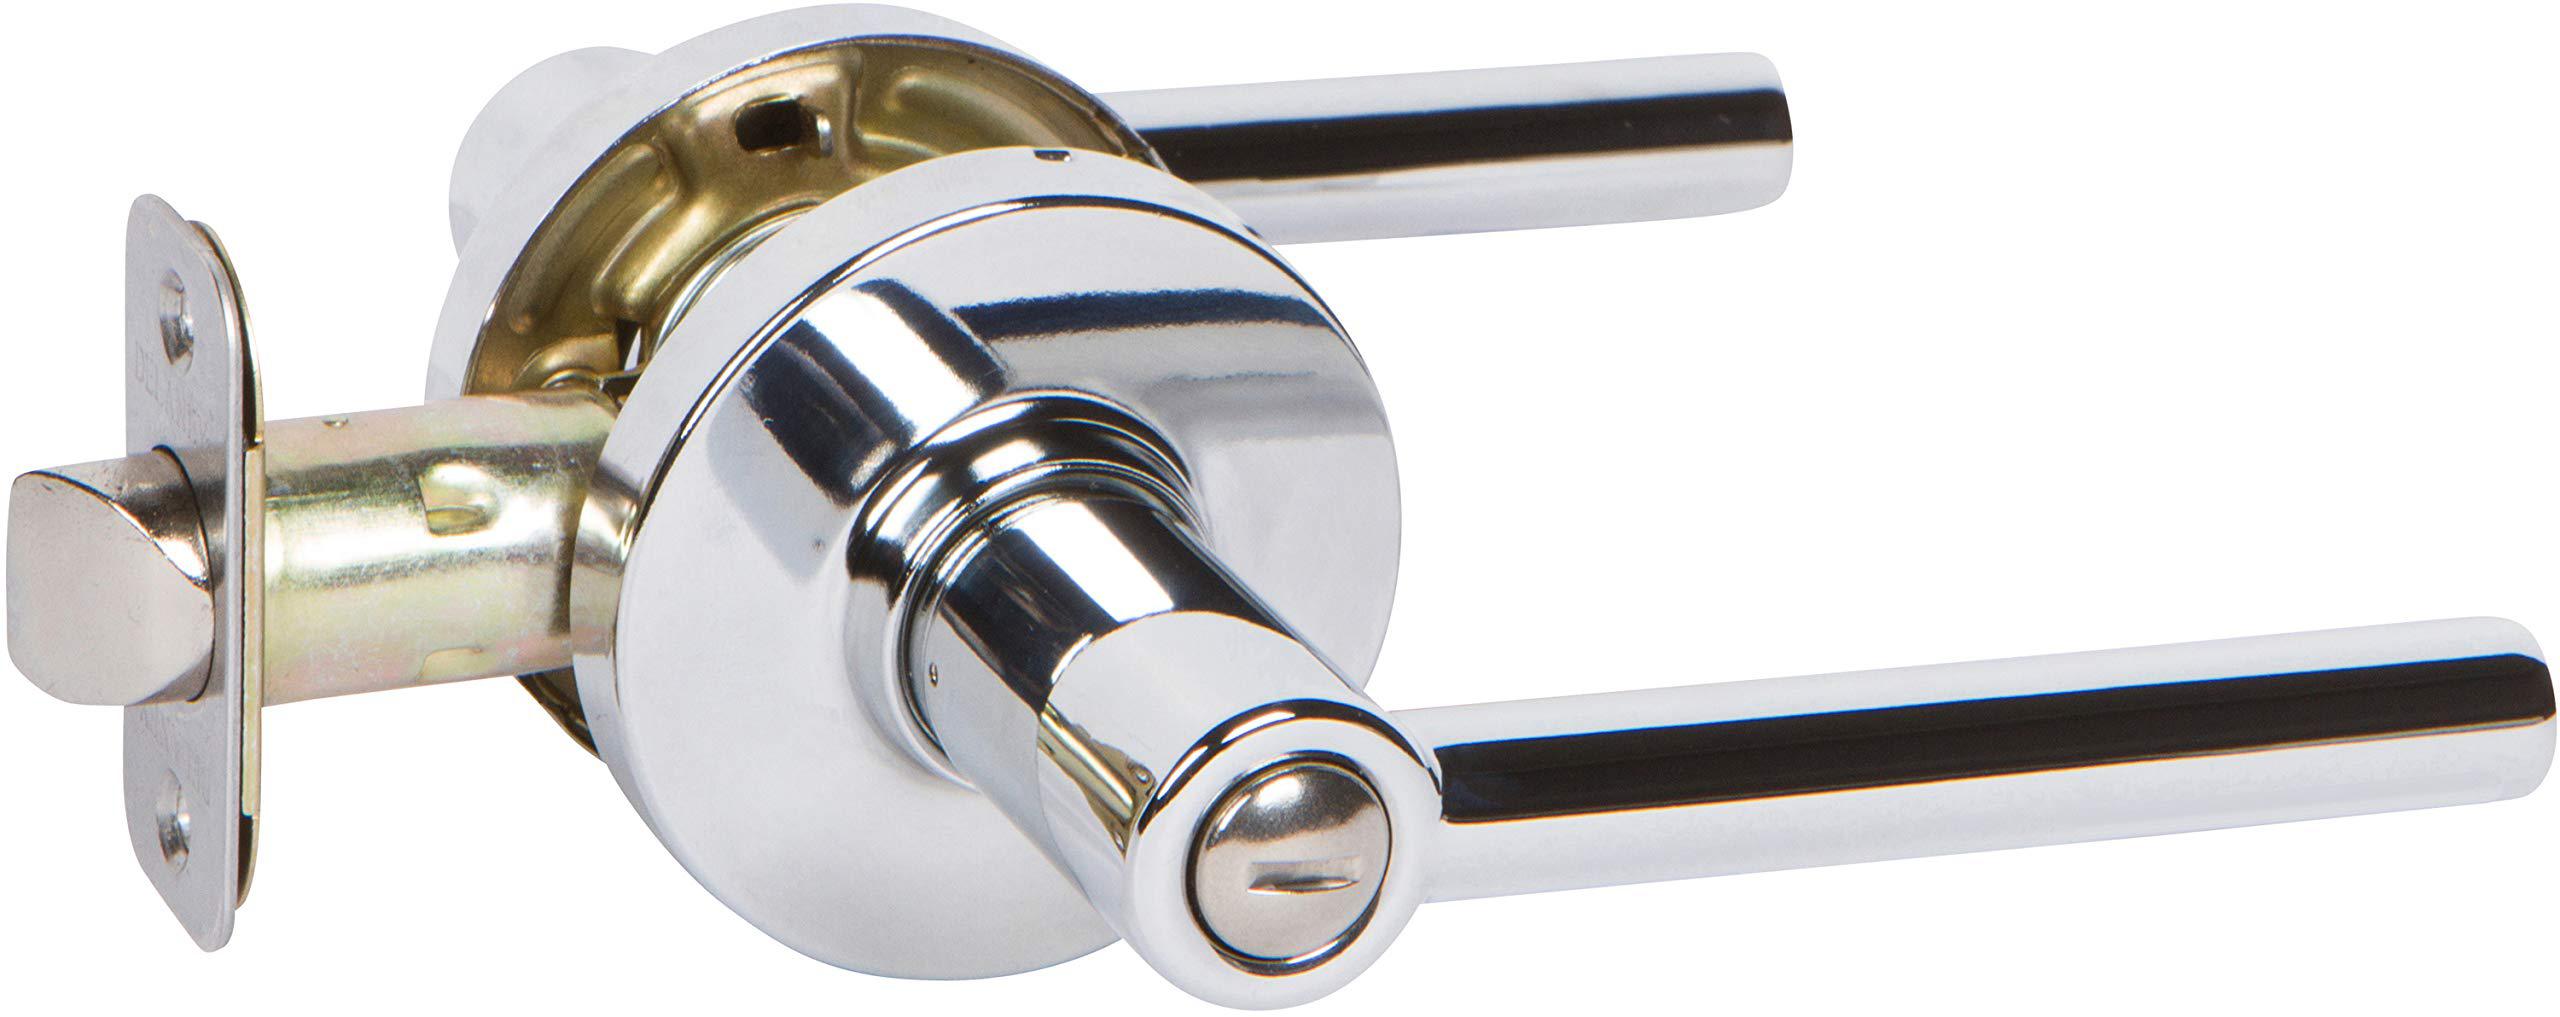 delaney hardware rd collection d50526 privacy door level handle lock set for bedroom and bathroom, chrome